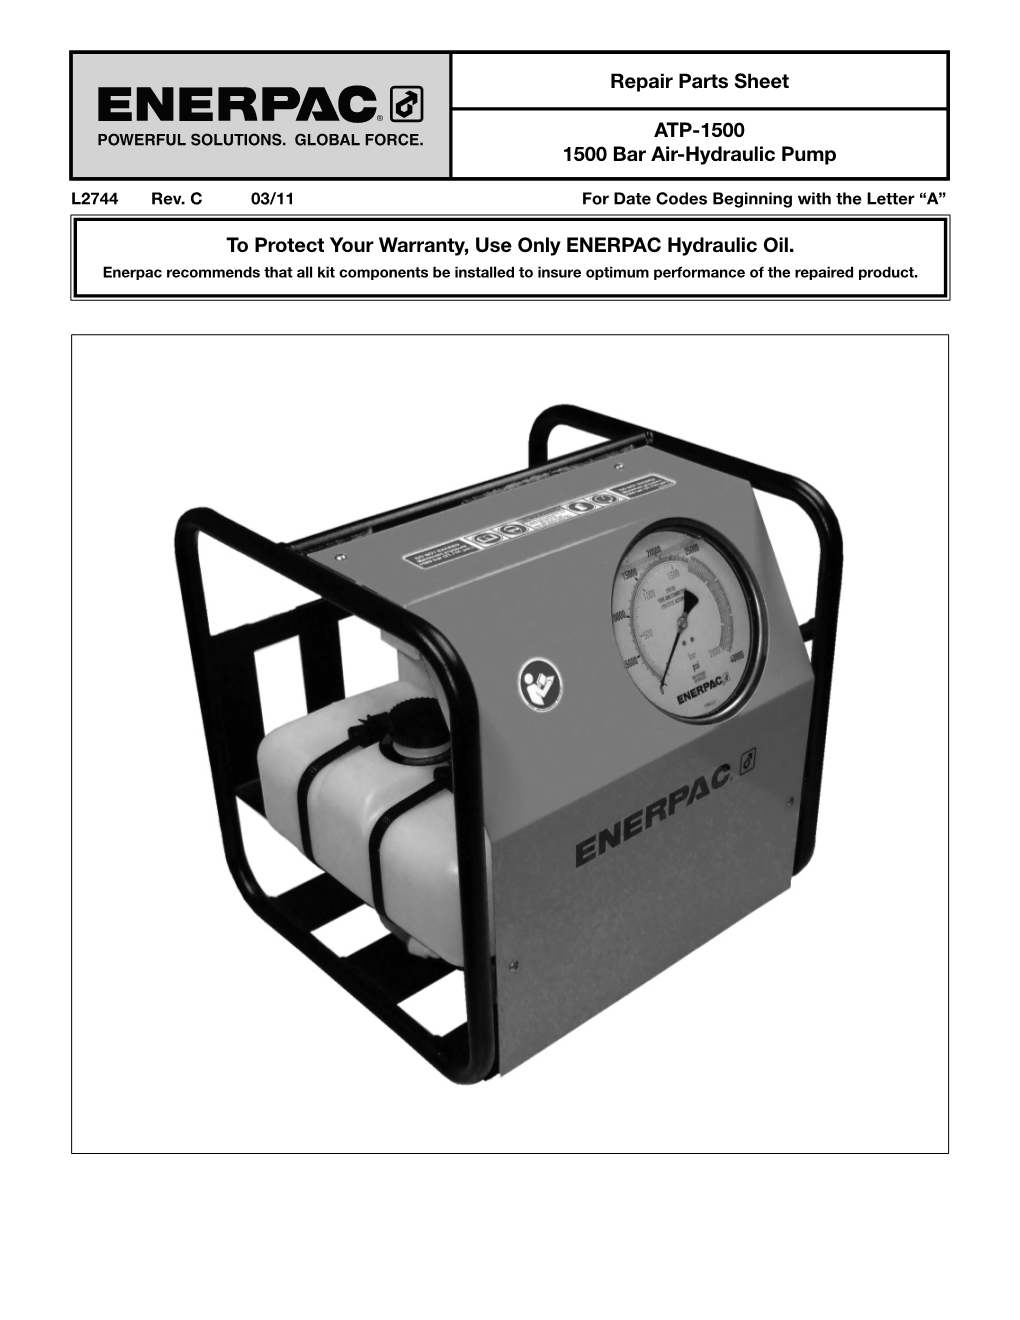 Repair Parts Sheet to Protect Your Warranty, Use Only ENERPAC